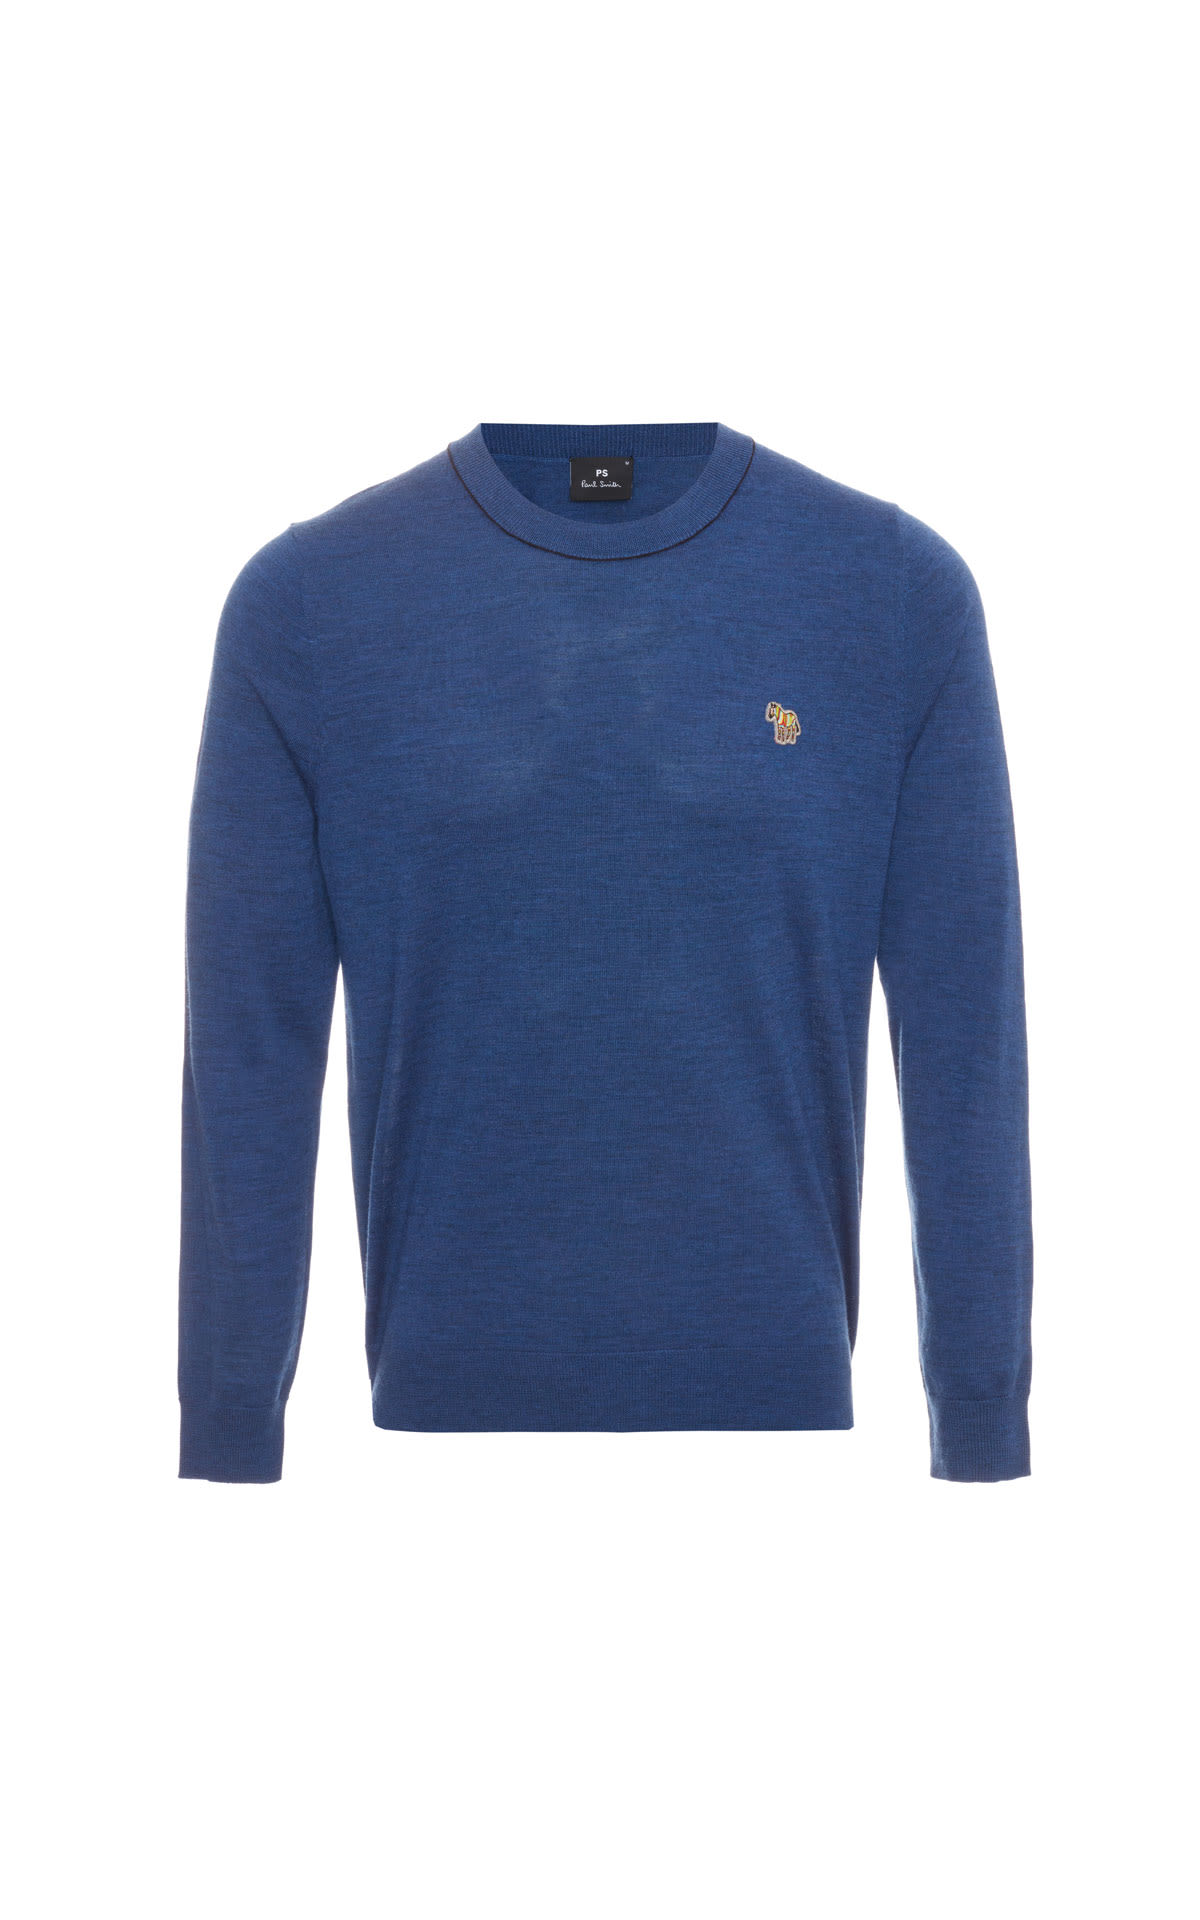 Paul Smith Pullover crew neck blue from Bicester Village